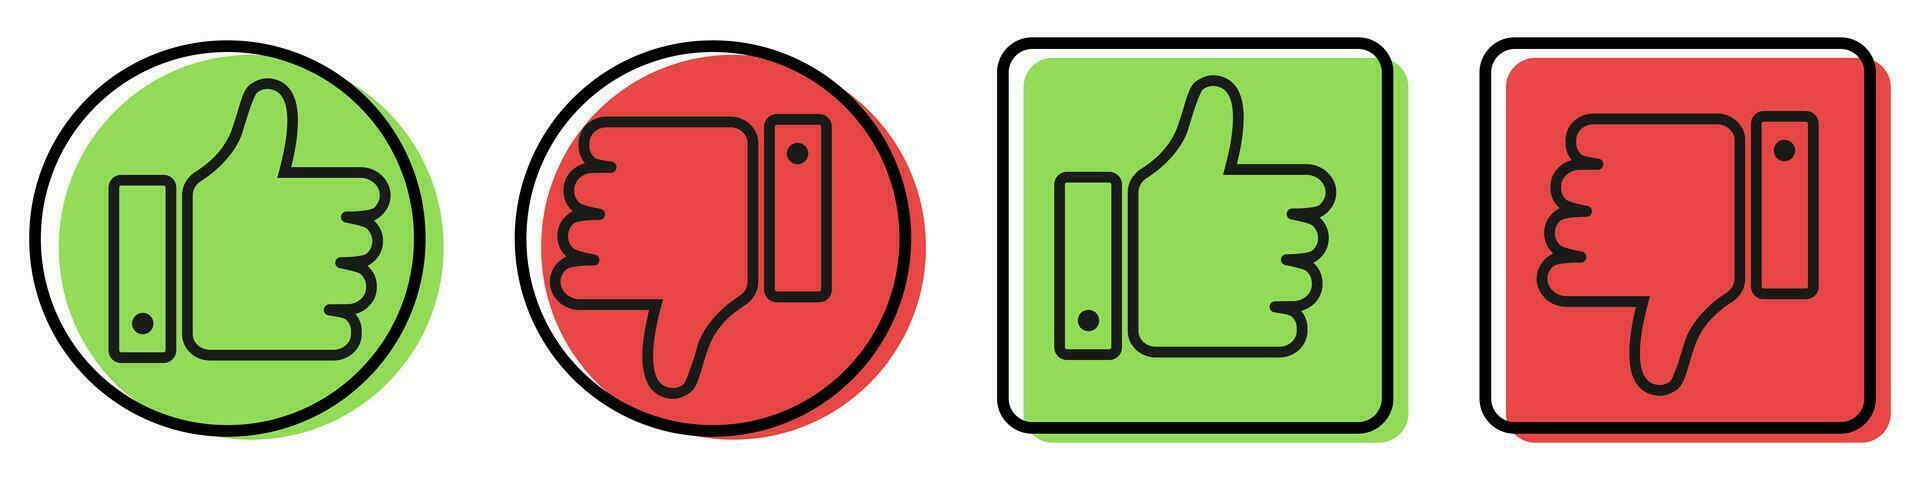 Thumbs up and down on white background. Isolated like and dislike symbol in circle and square shapes. Positive and negative icons in red and green. Confirm and okay thumbs. Vector EPS 10.